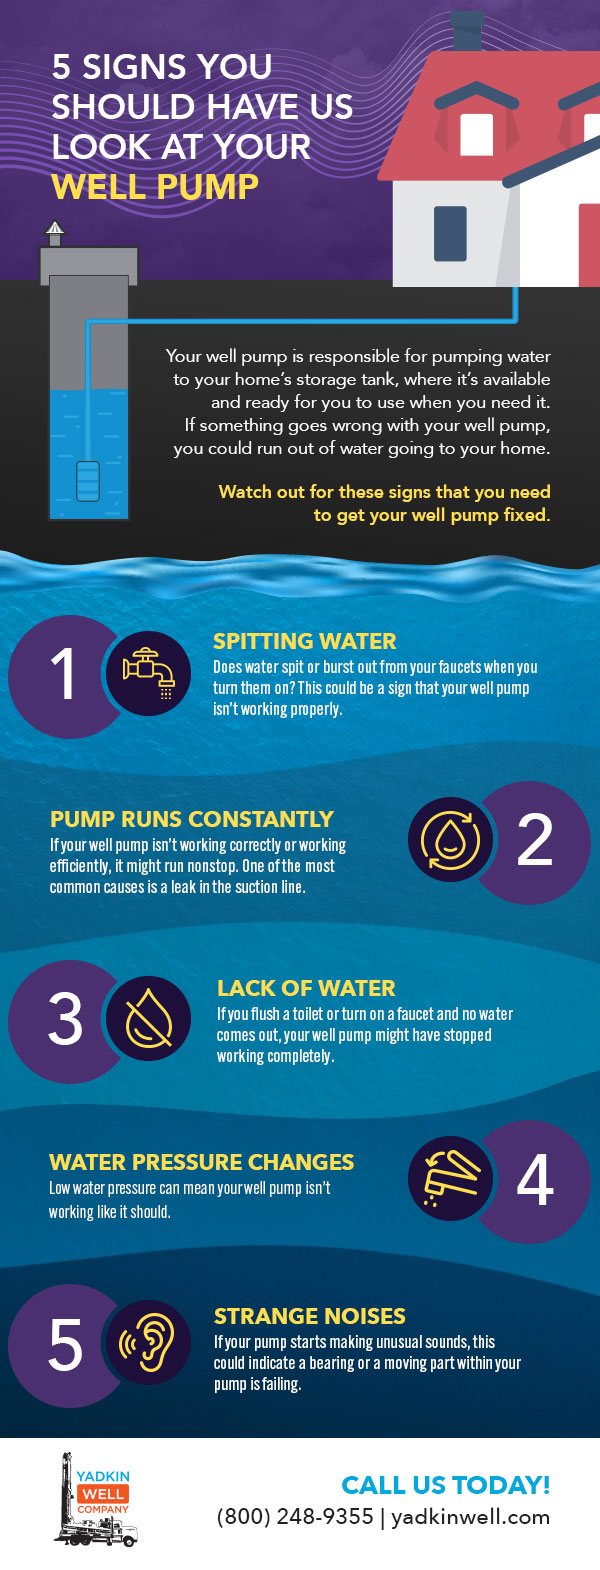 5 Signs You Should Have Us Look at Your Well Pump